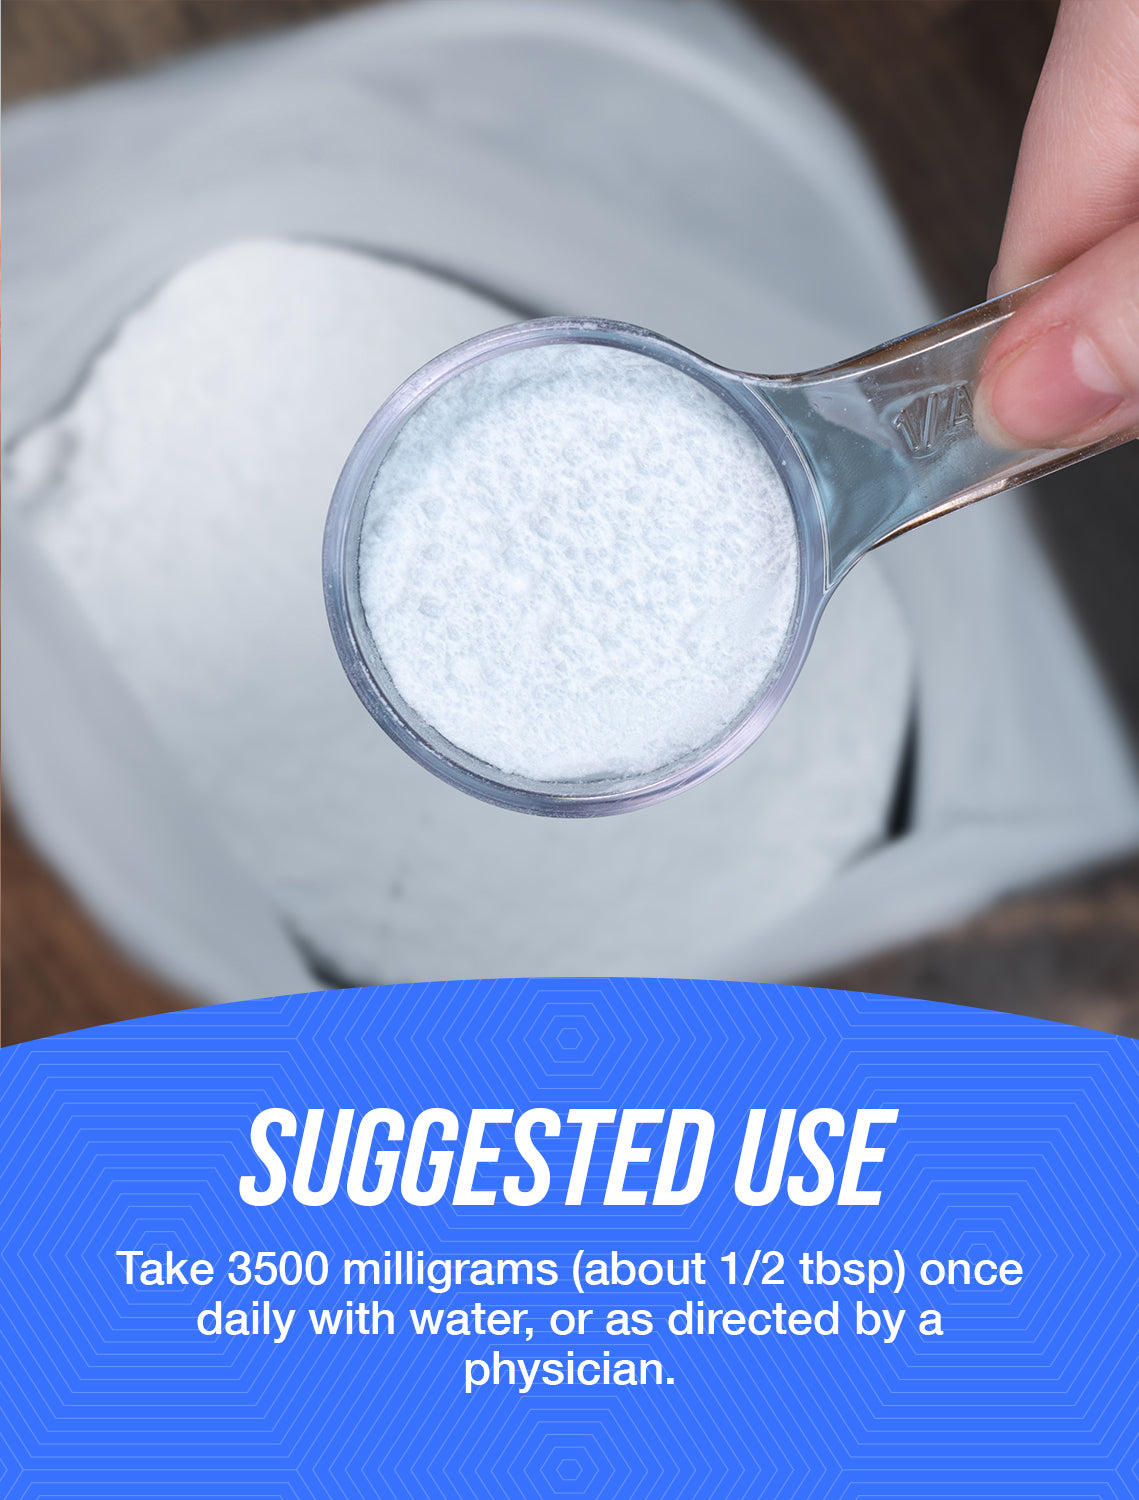 Magnesium citrate powder suggested use image